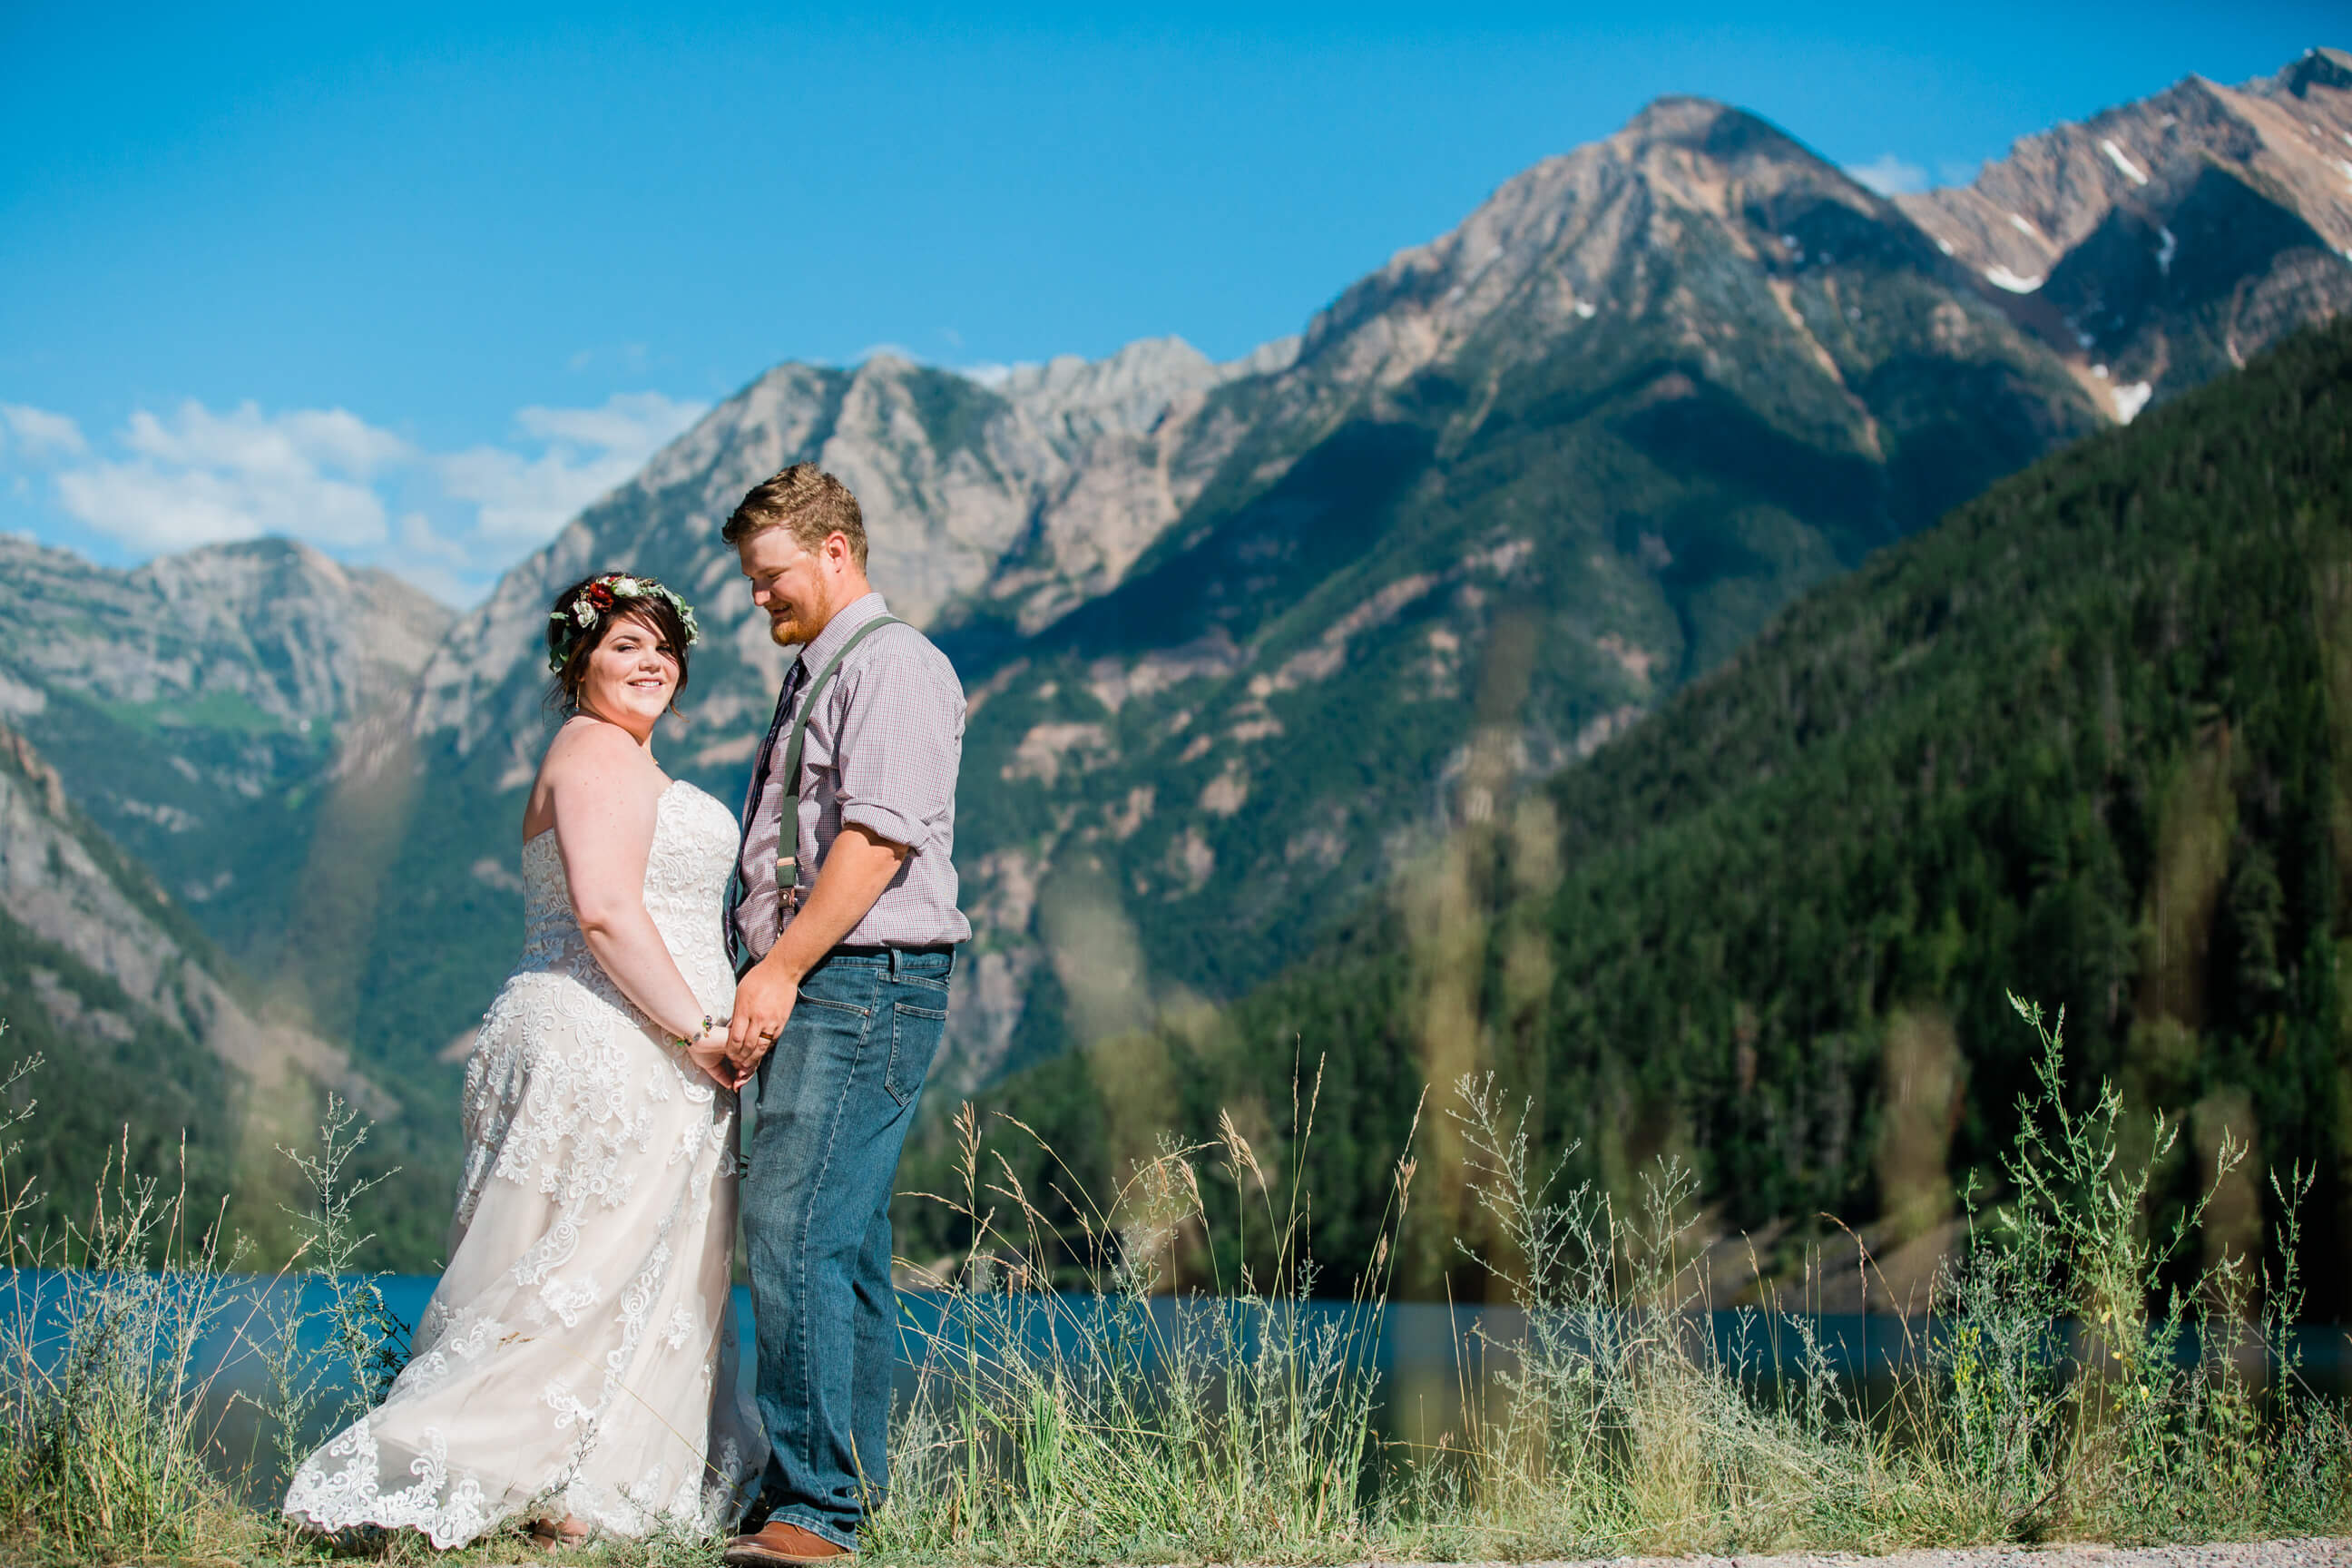 A bride and groom smile as they stand in front of mountains and a lake during their Montana elopement